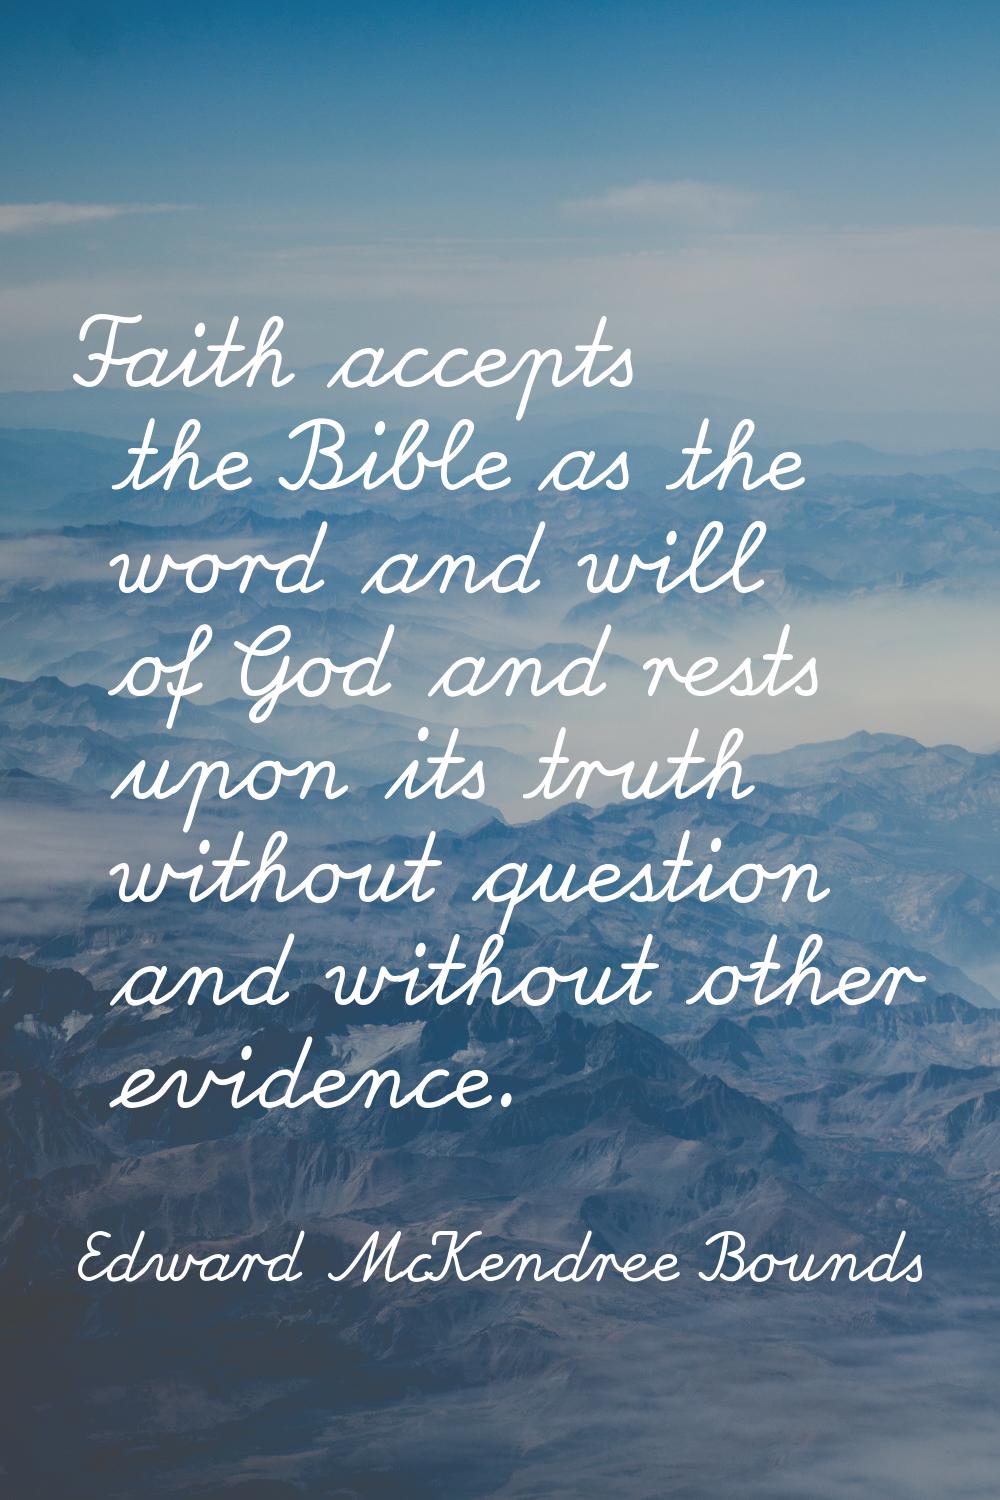 Faith accepts the Bible as the word and will of God and rests upon its truth without question and w